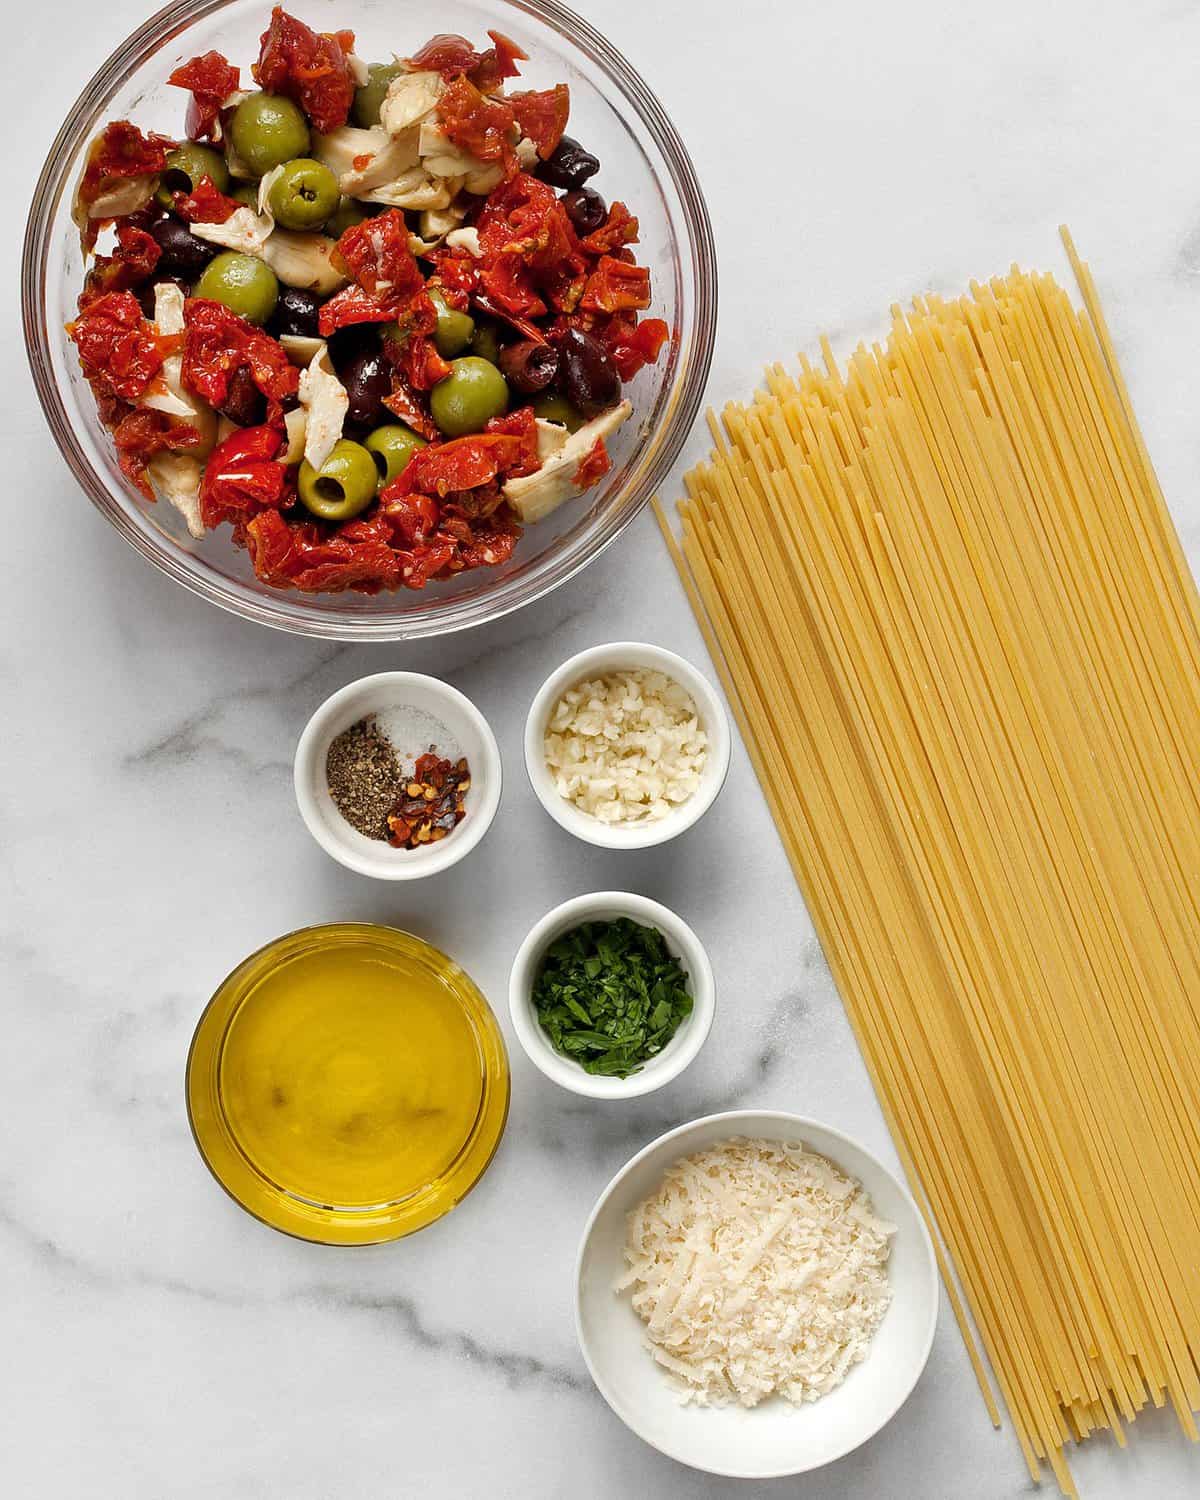 Ingredients including roasted tomatoes, olives, artichokes, spaghetti, parmesan, garlic and olive oil.